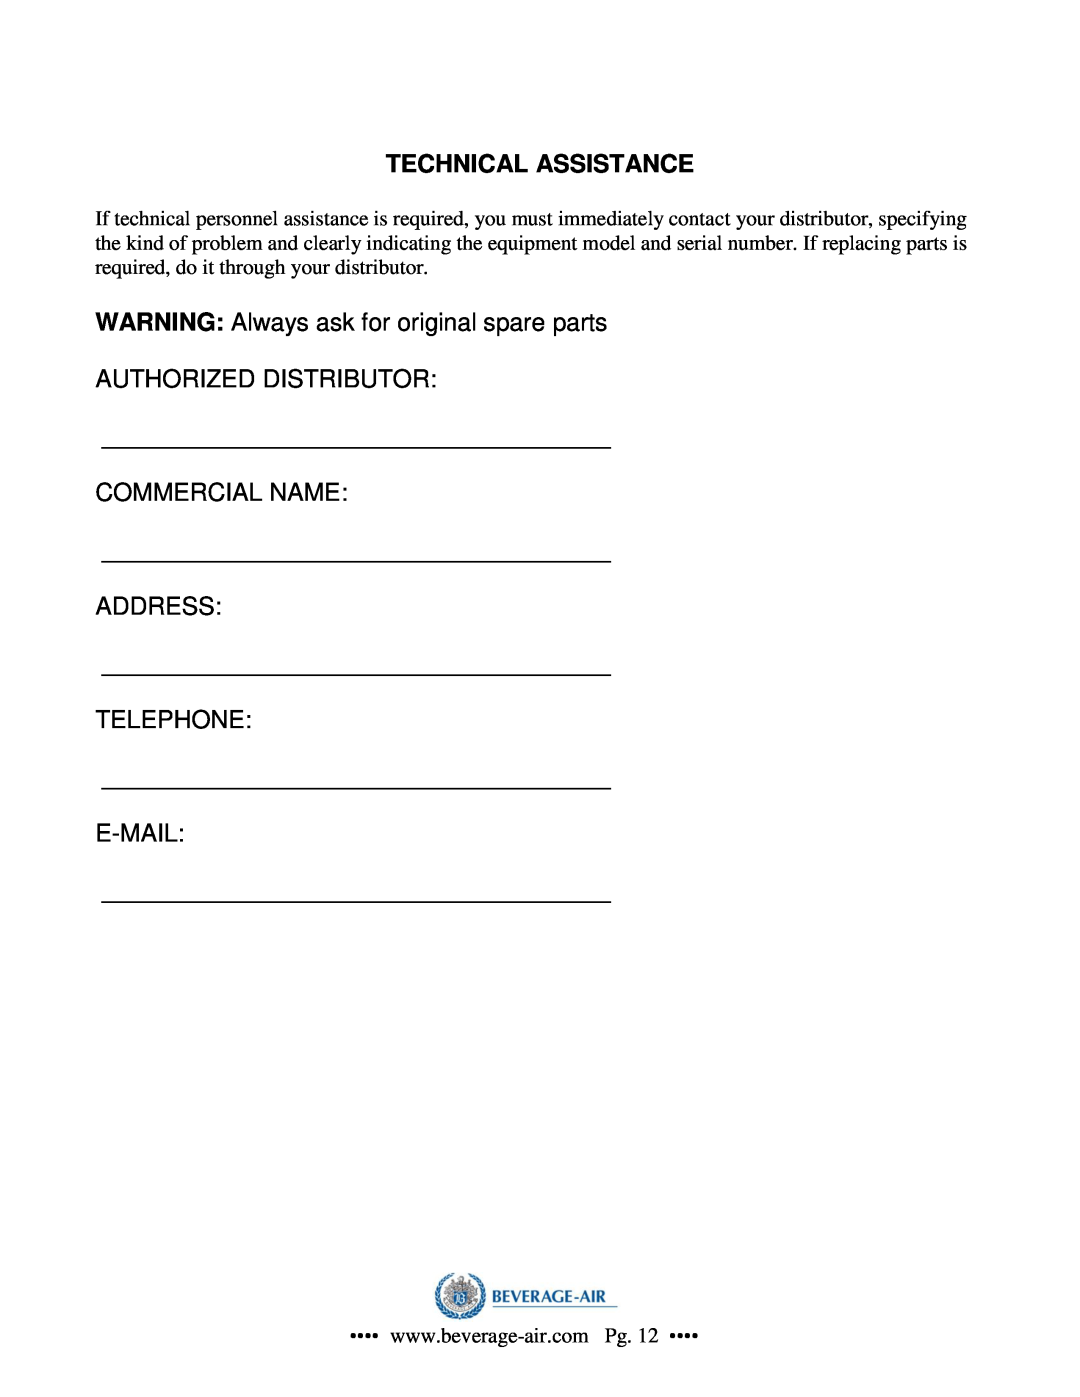 Beverage-Air CF-3 operation manual Technical Assistance 